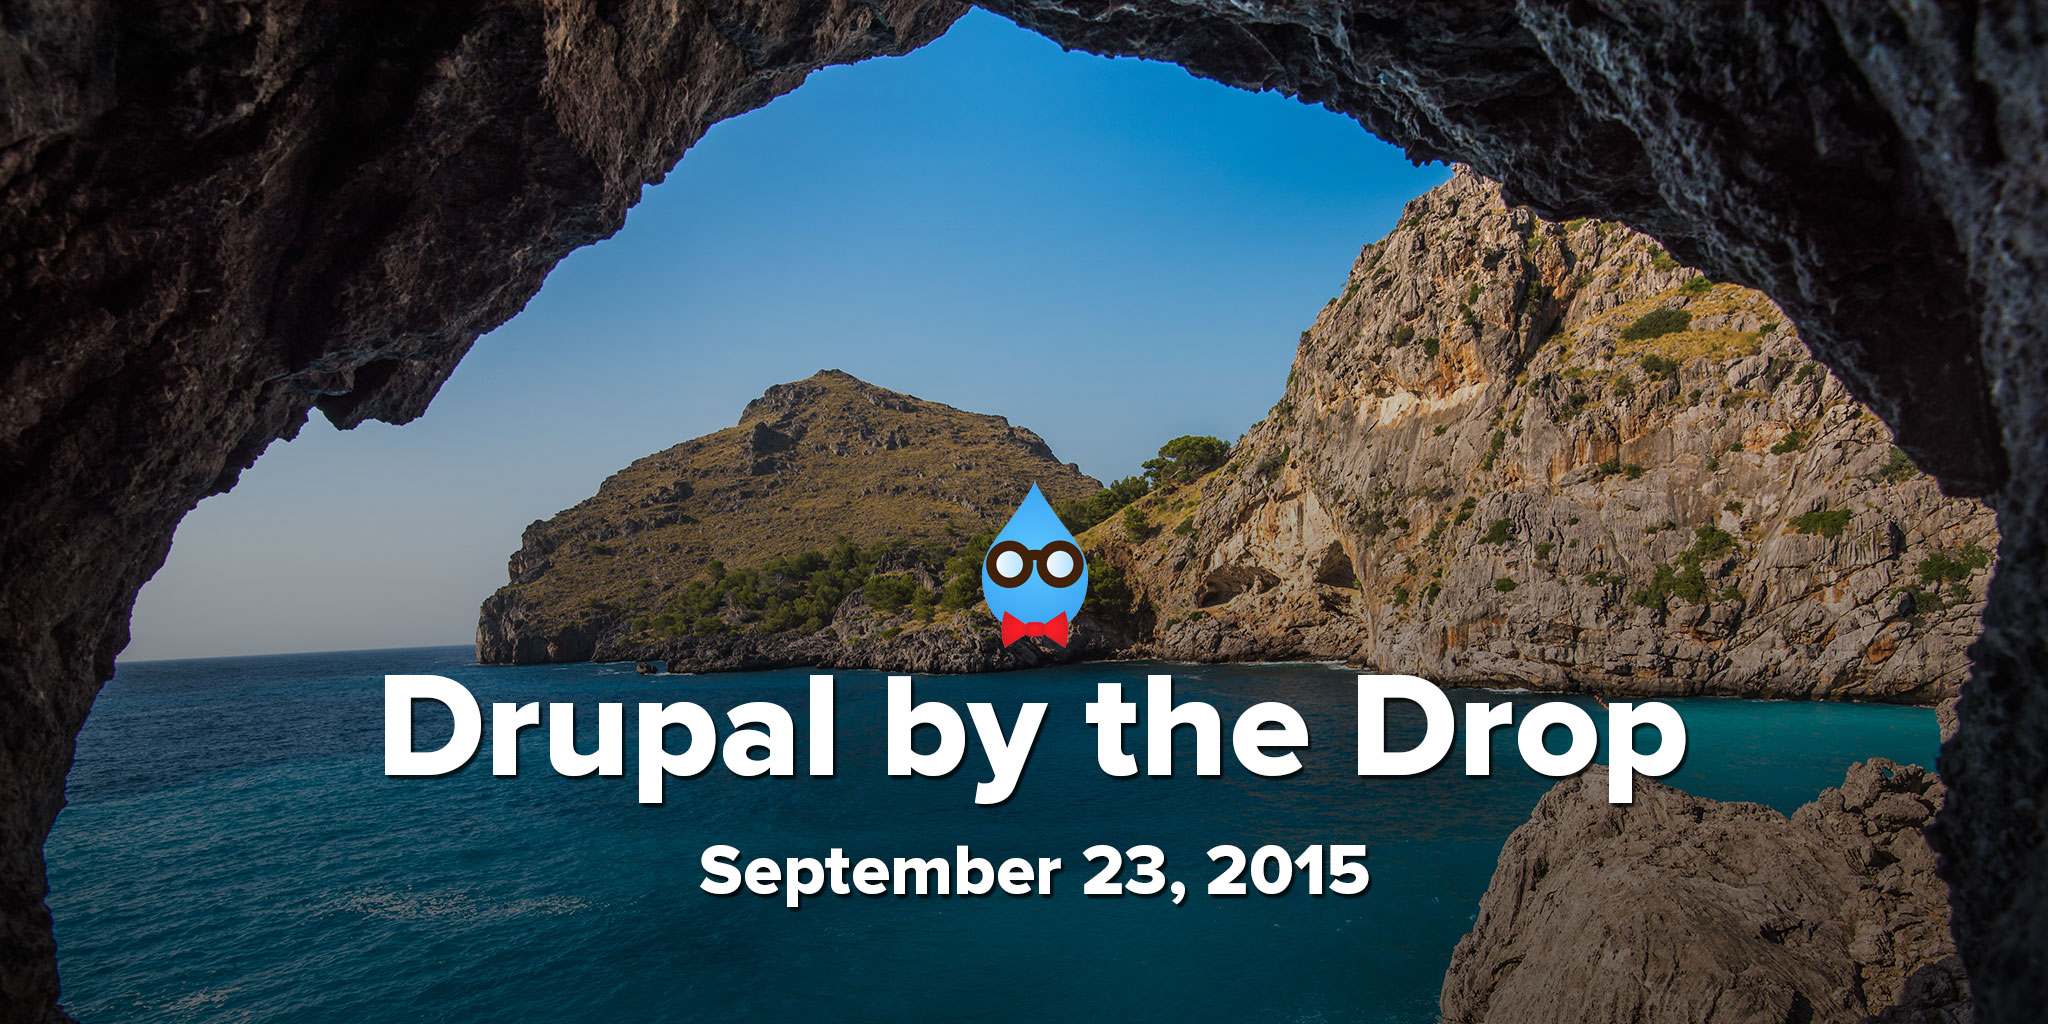 Drupal by the Drop: September 23, 2015